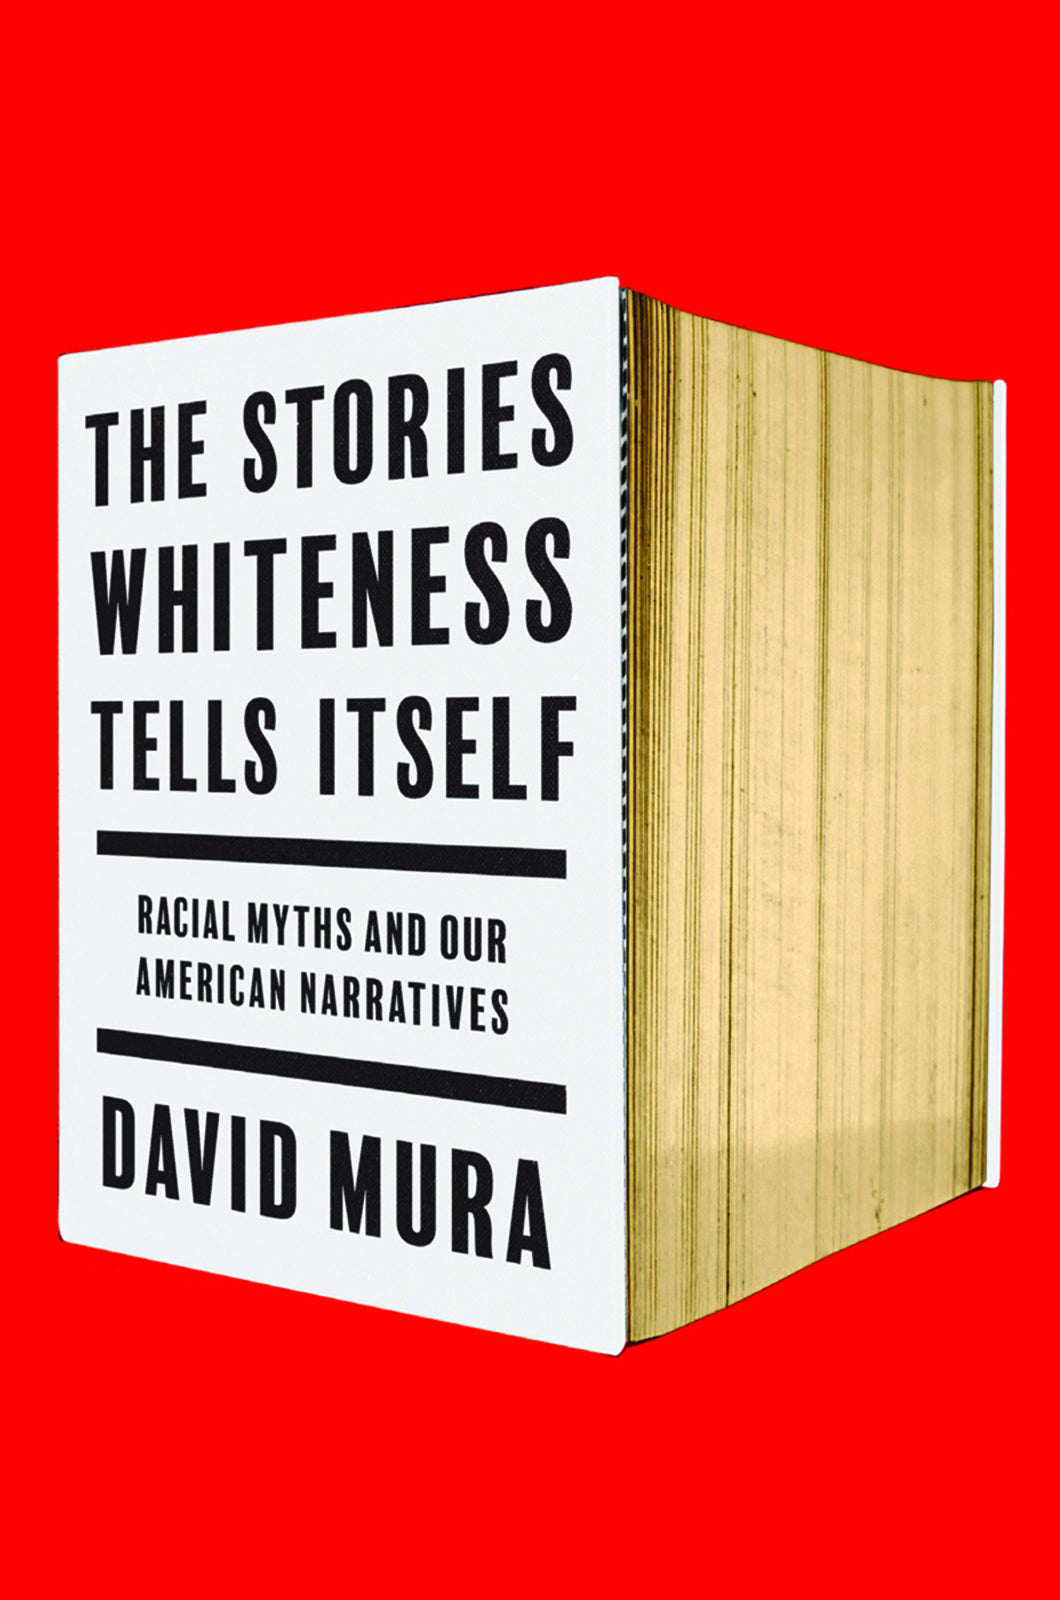 The Stories Whiteness Tells Itself: Racial Myths and Our American Narratives (Paperback)